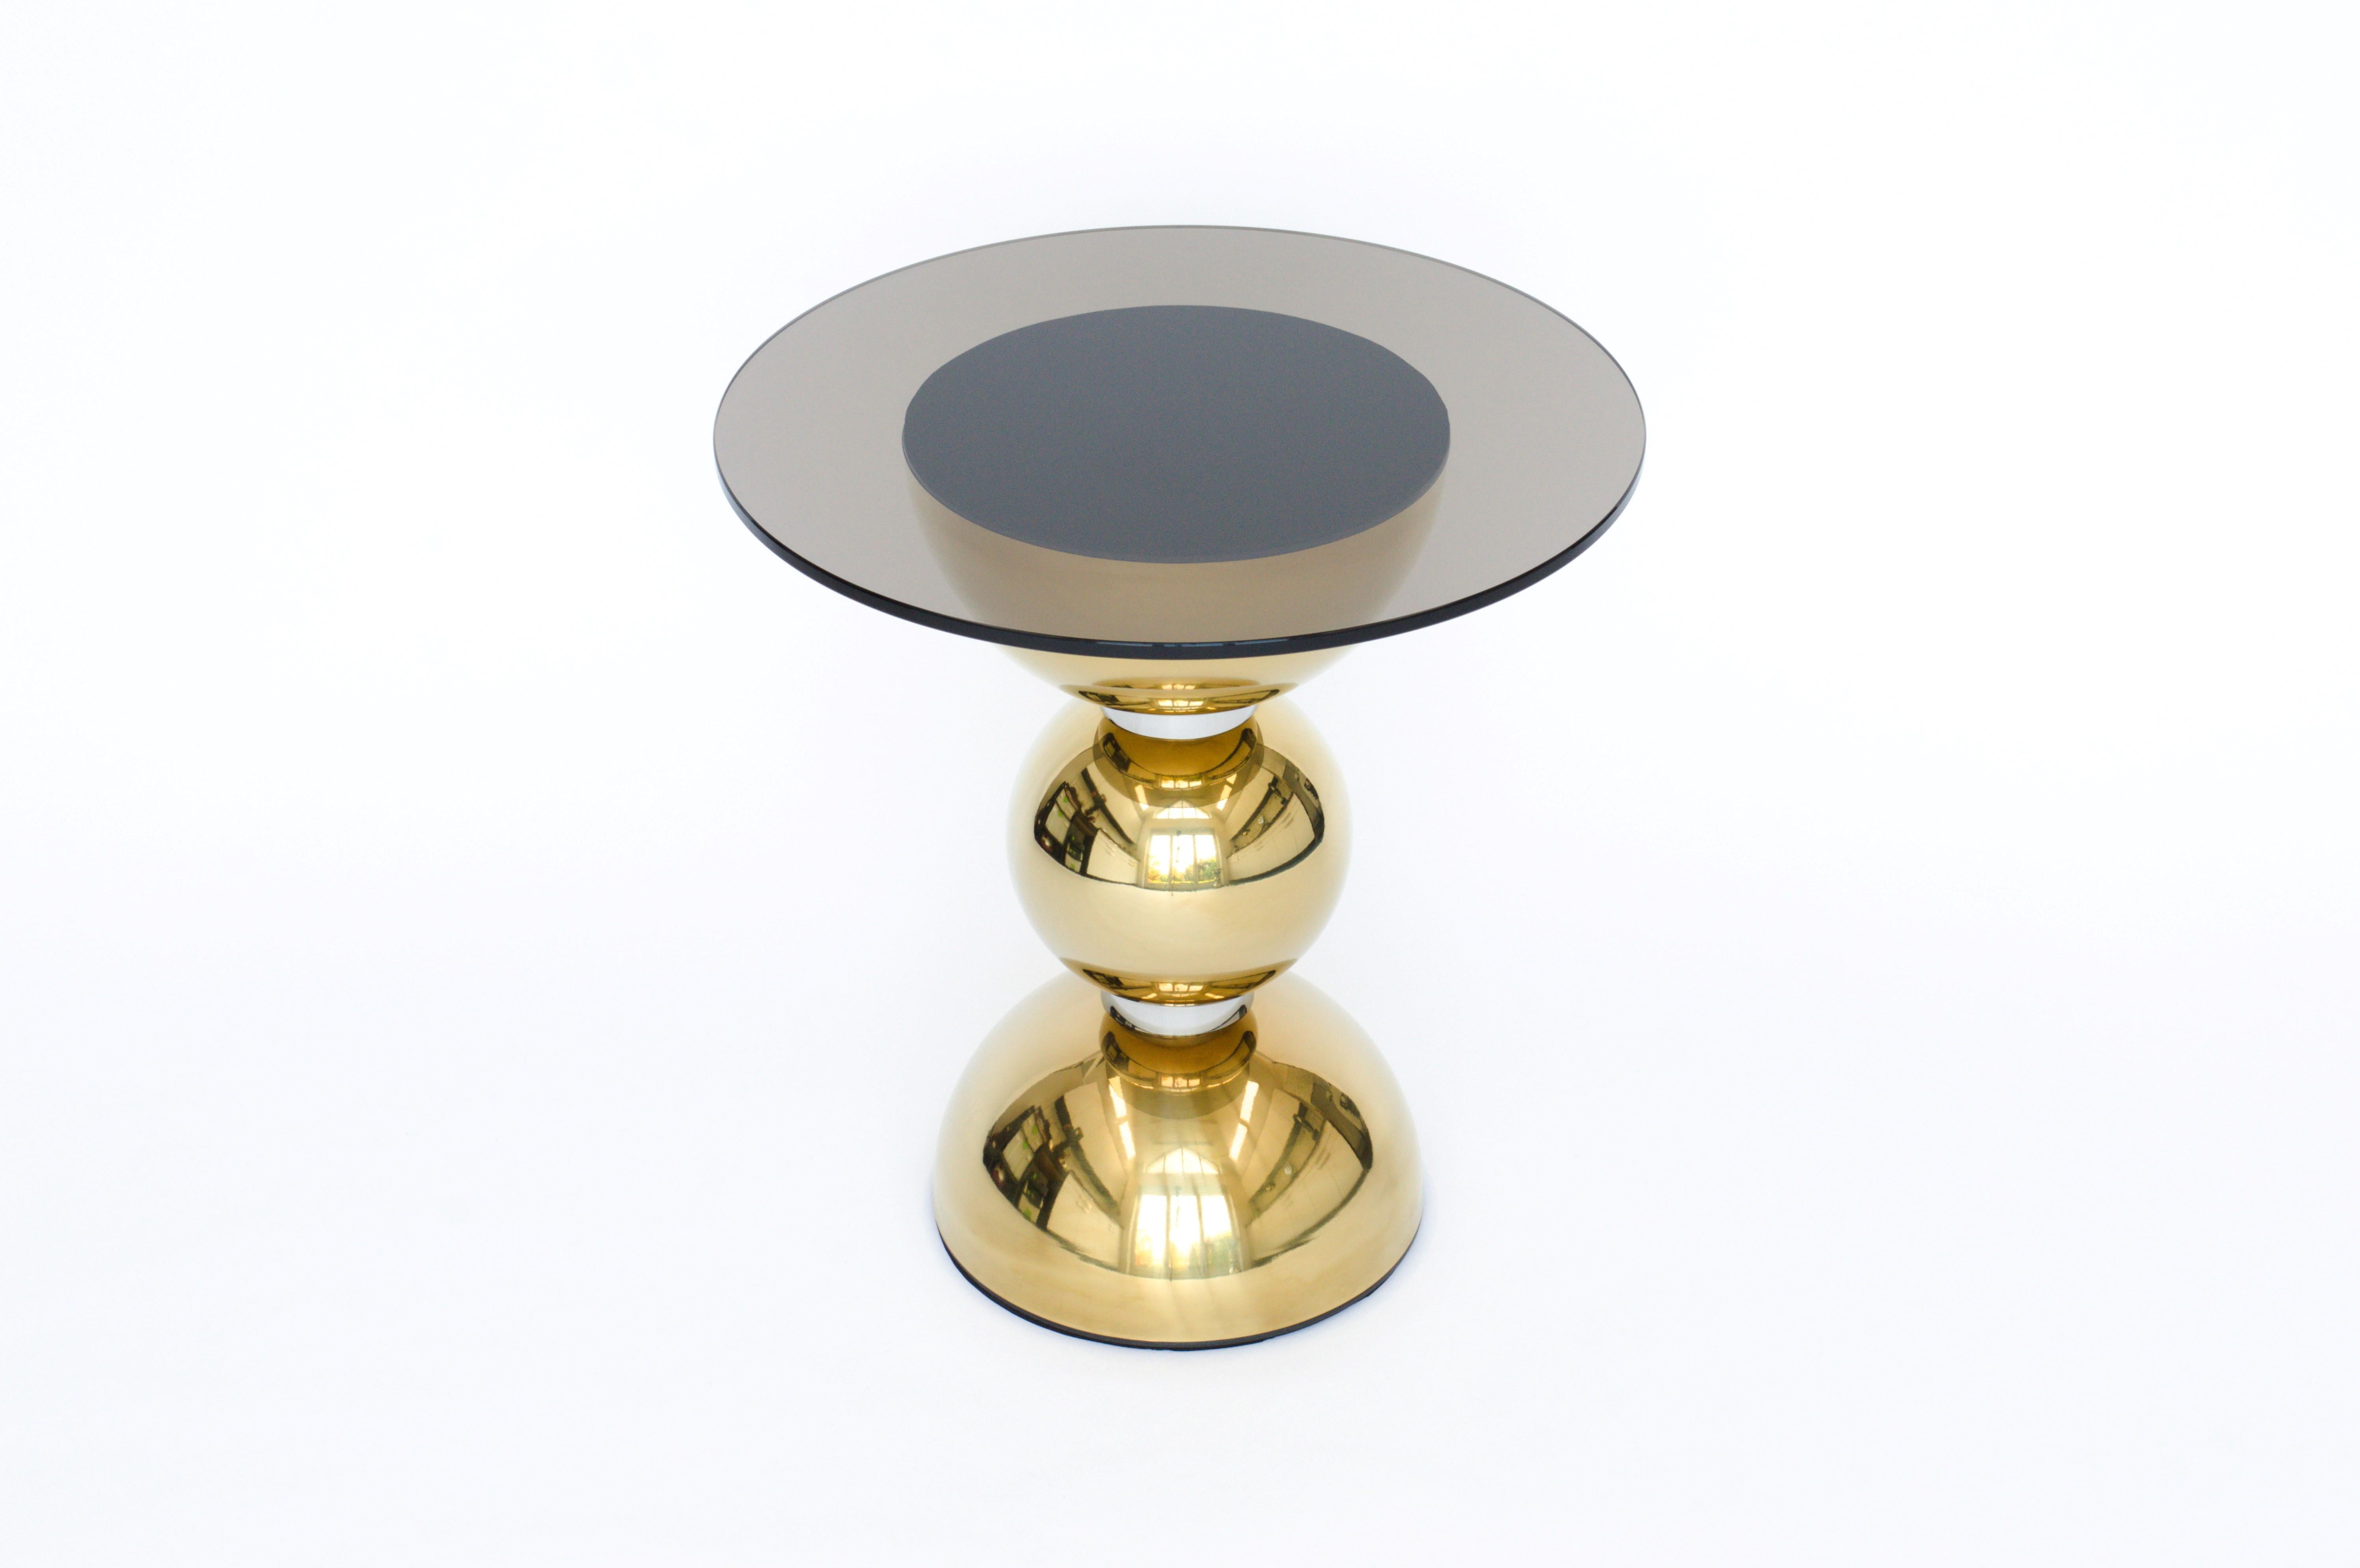 Space Age Contemporary Apollo Table in Polished Stainless Steel